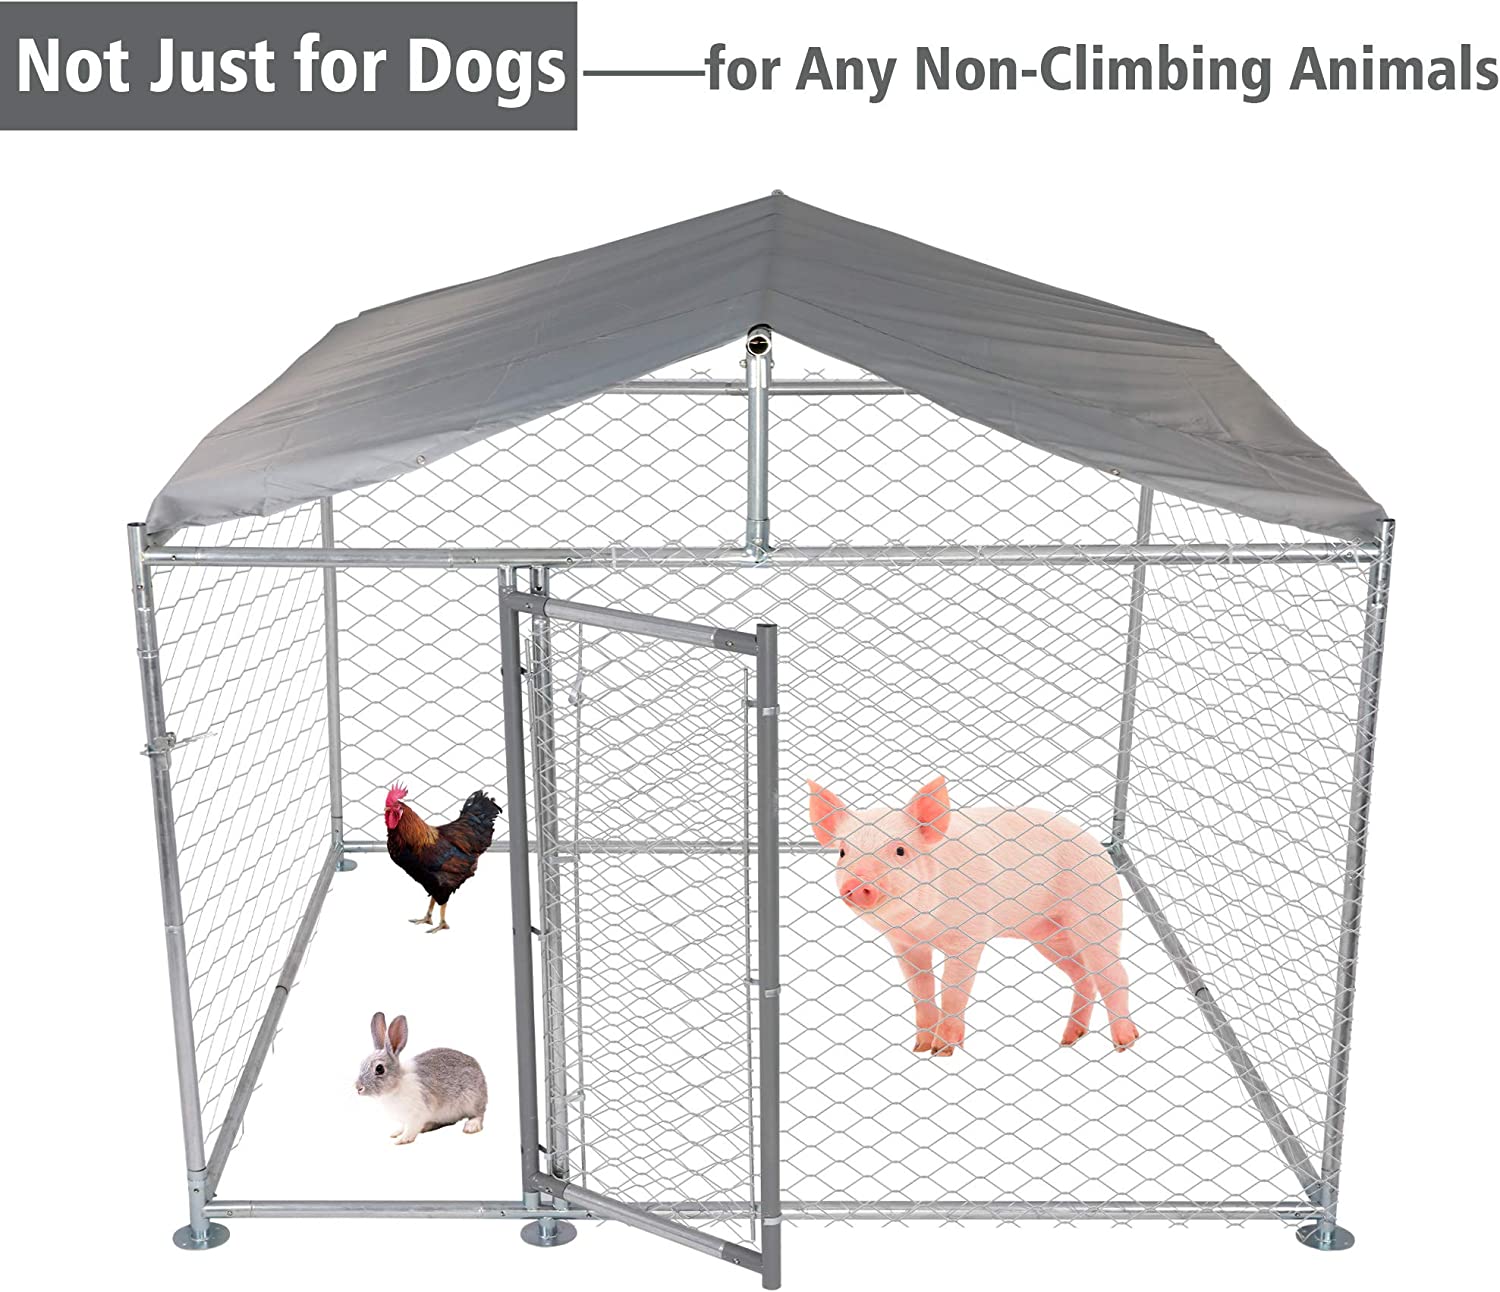 Outdoor Dog Kennel Galvanized Mesh Steel Dog Chain Link Fence Playpen with Cover 6.5x6.5x5ft